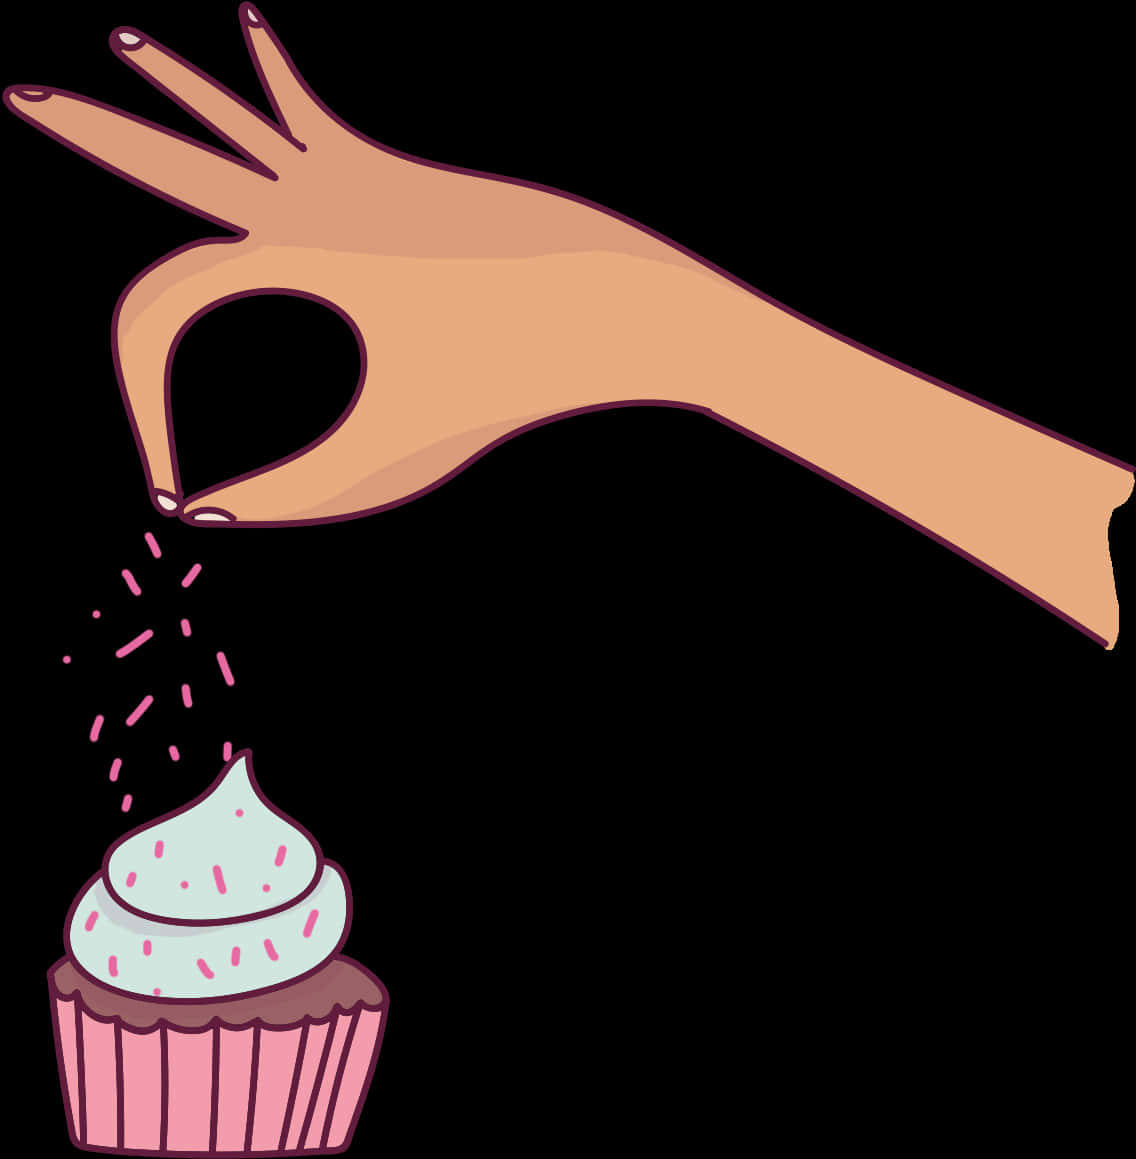 Hand Sprinkling Toppingson Cupcake PNG